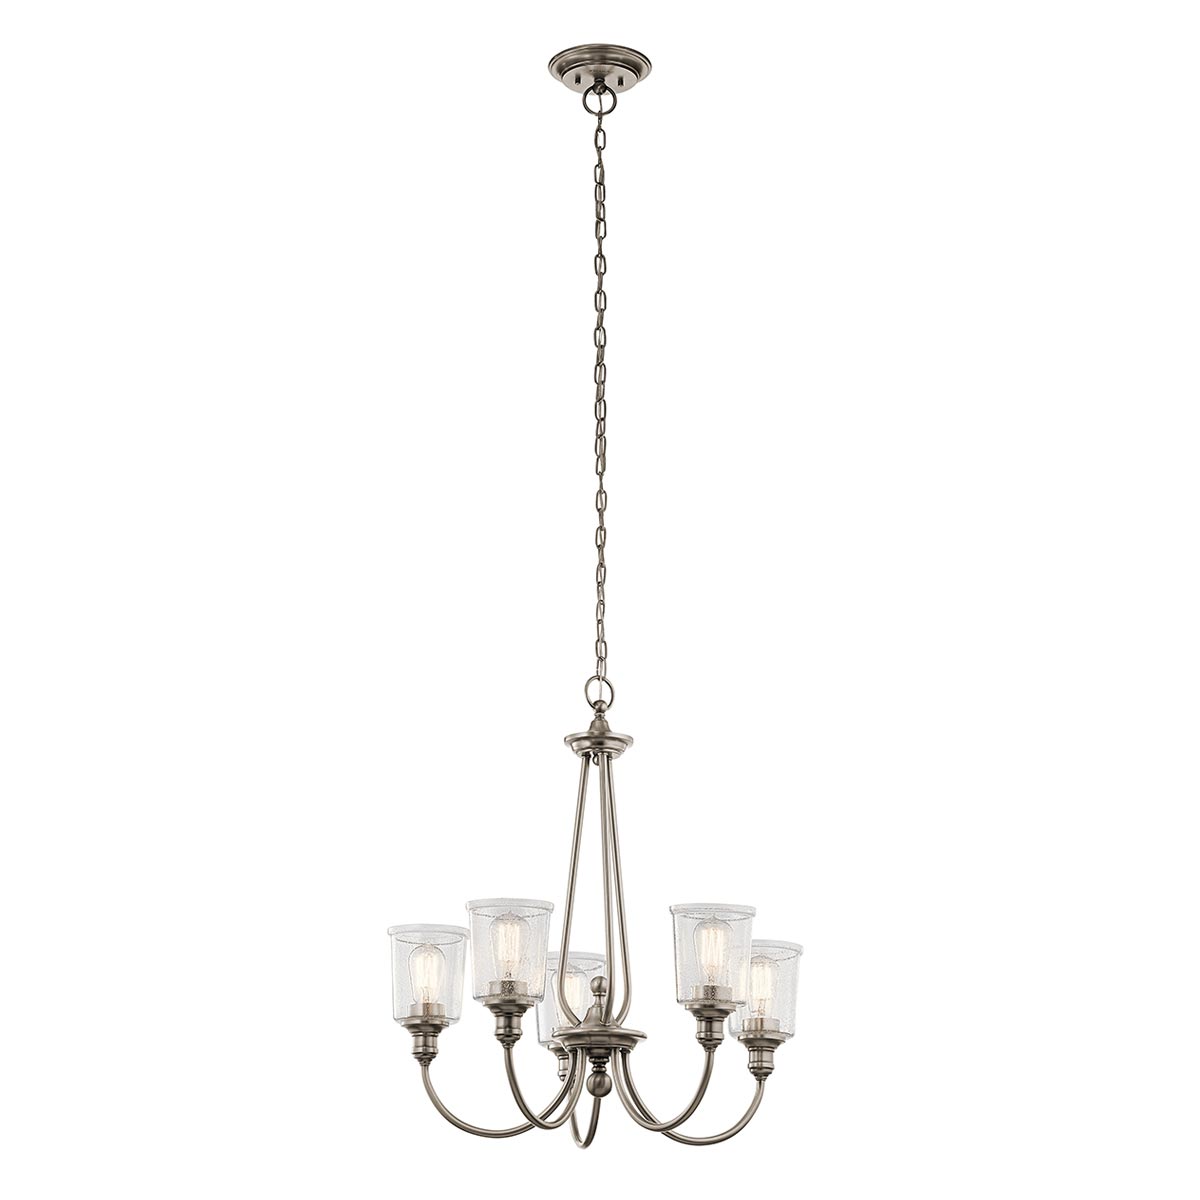 Kichler Waverly Classic Pewter 5 Light Chandelier Seeded Glass Shades